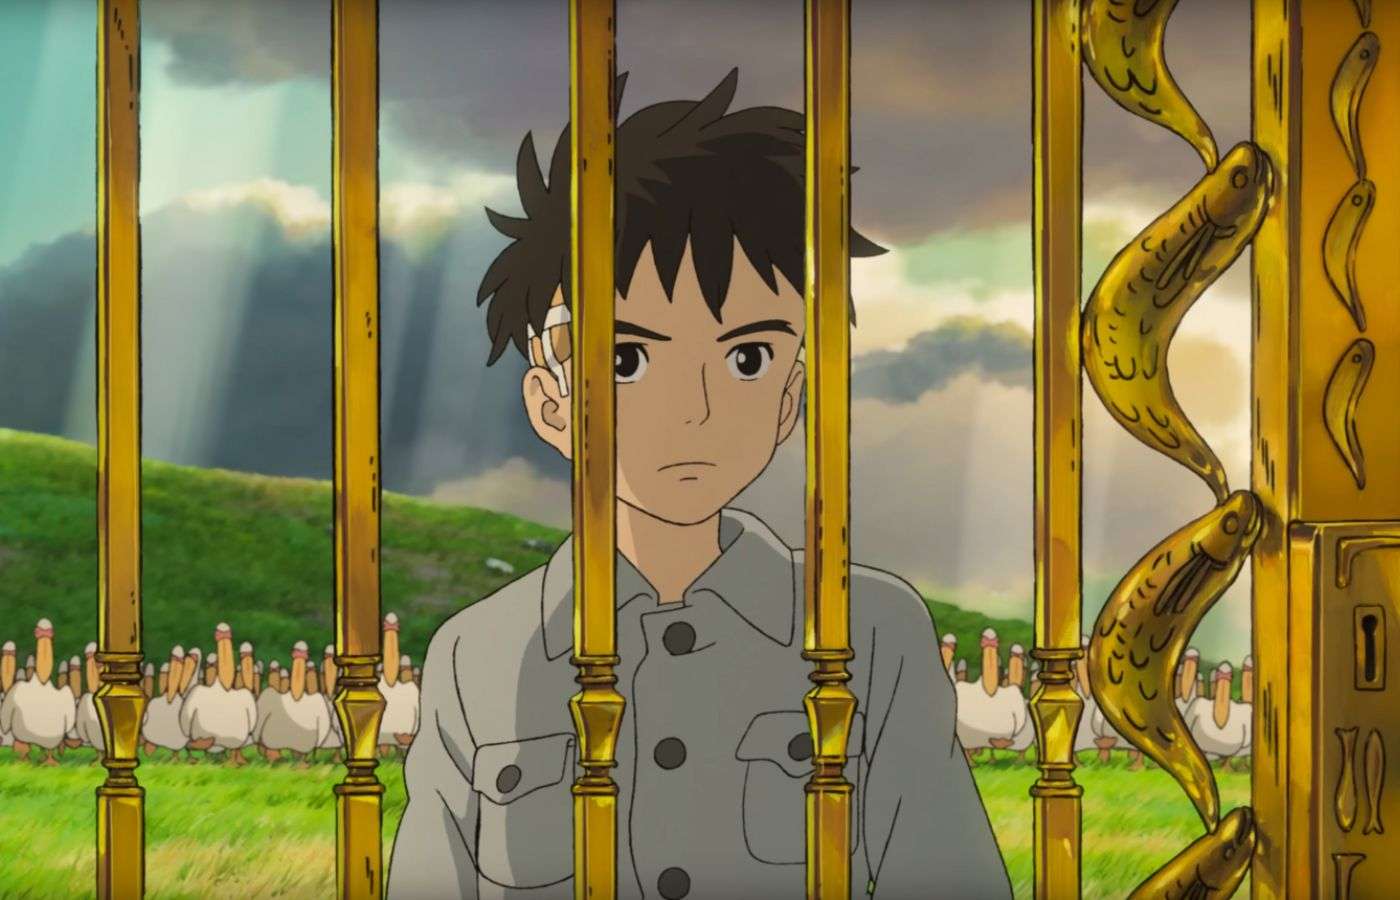 How to watch The Boy and the Heron – is it streaming? - Dexerto